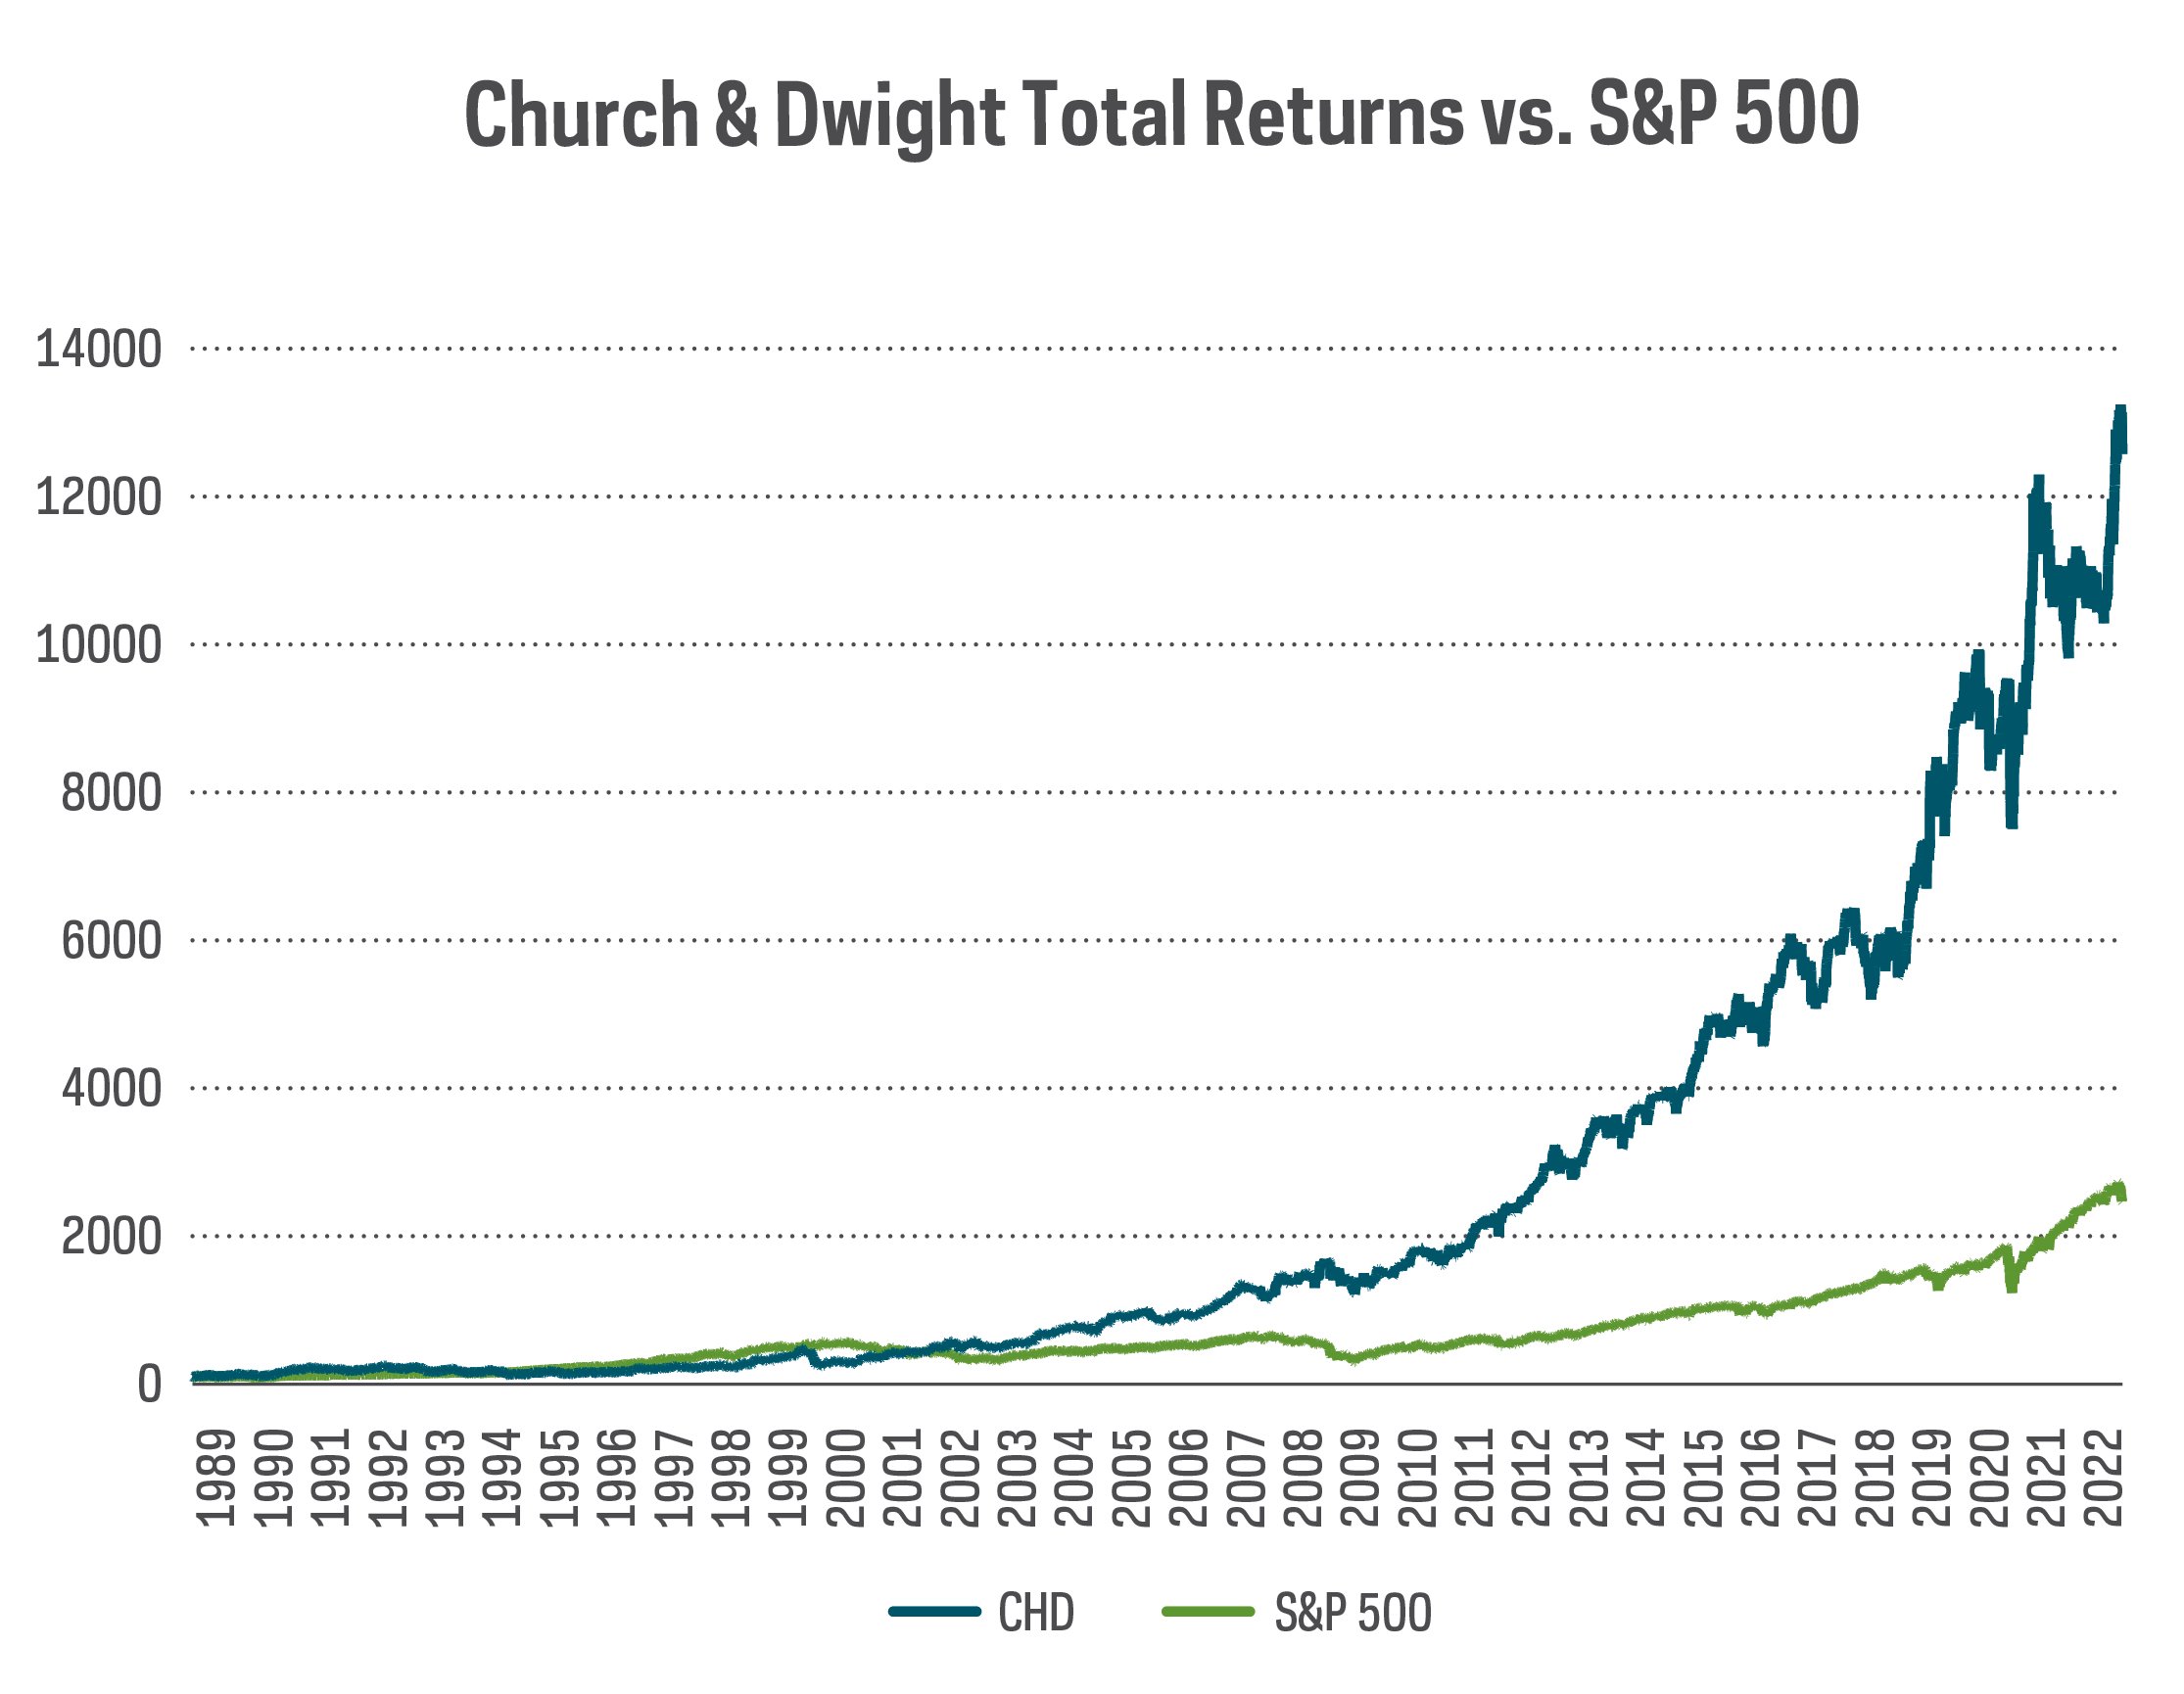 Church and Dwight Total Returns v. S&P 500